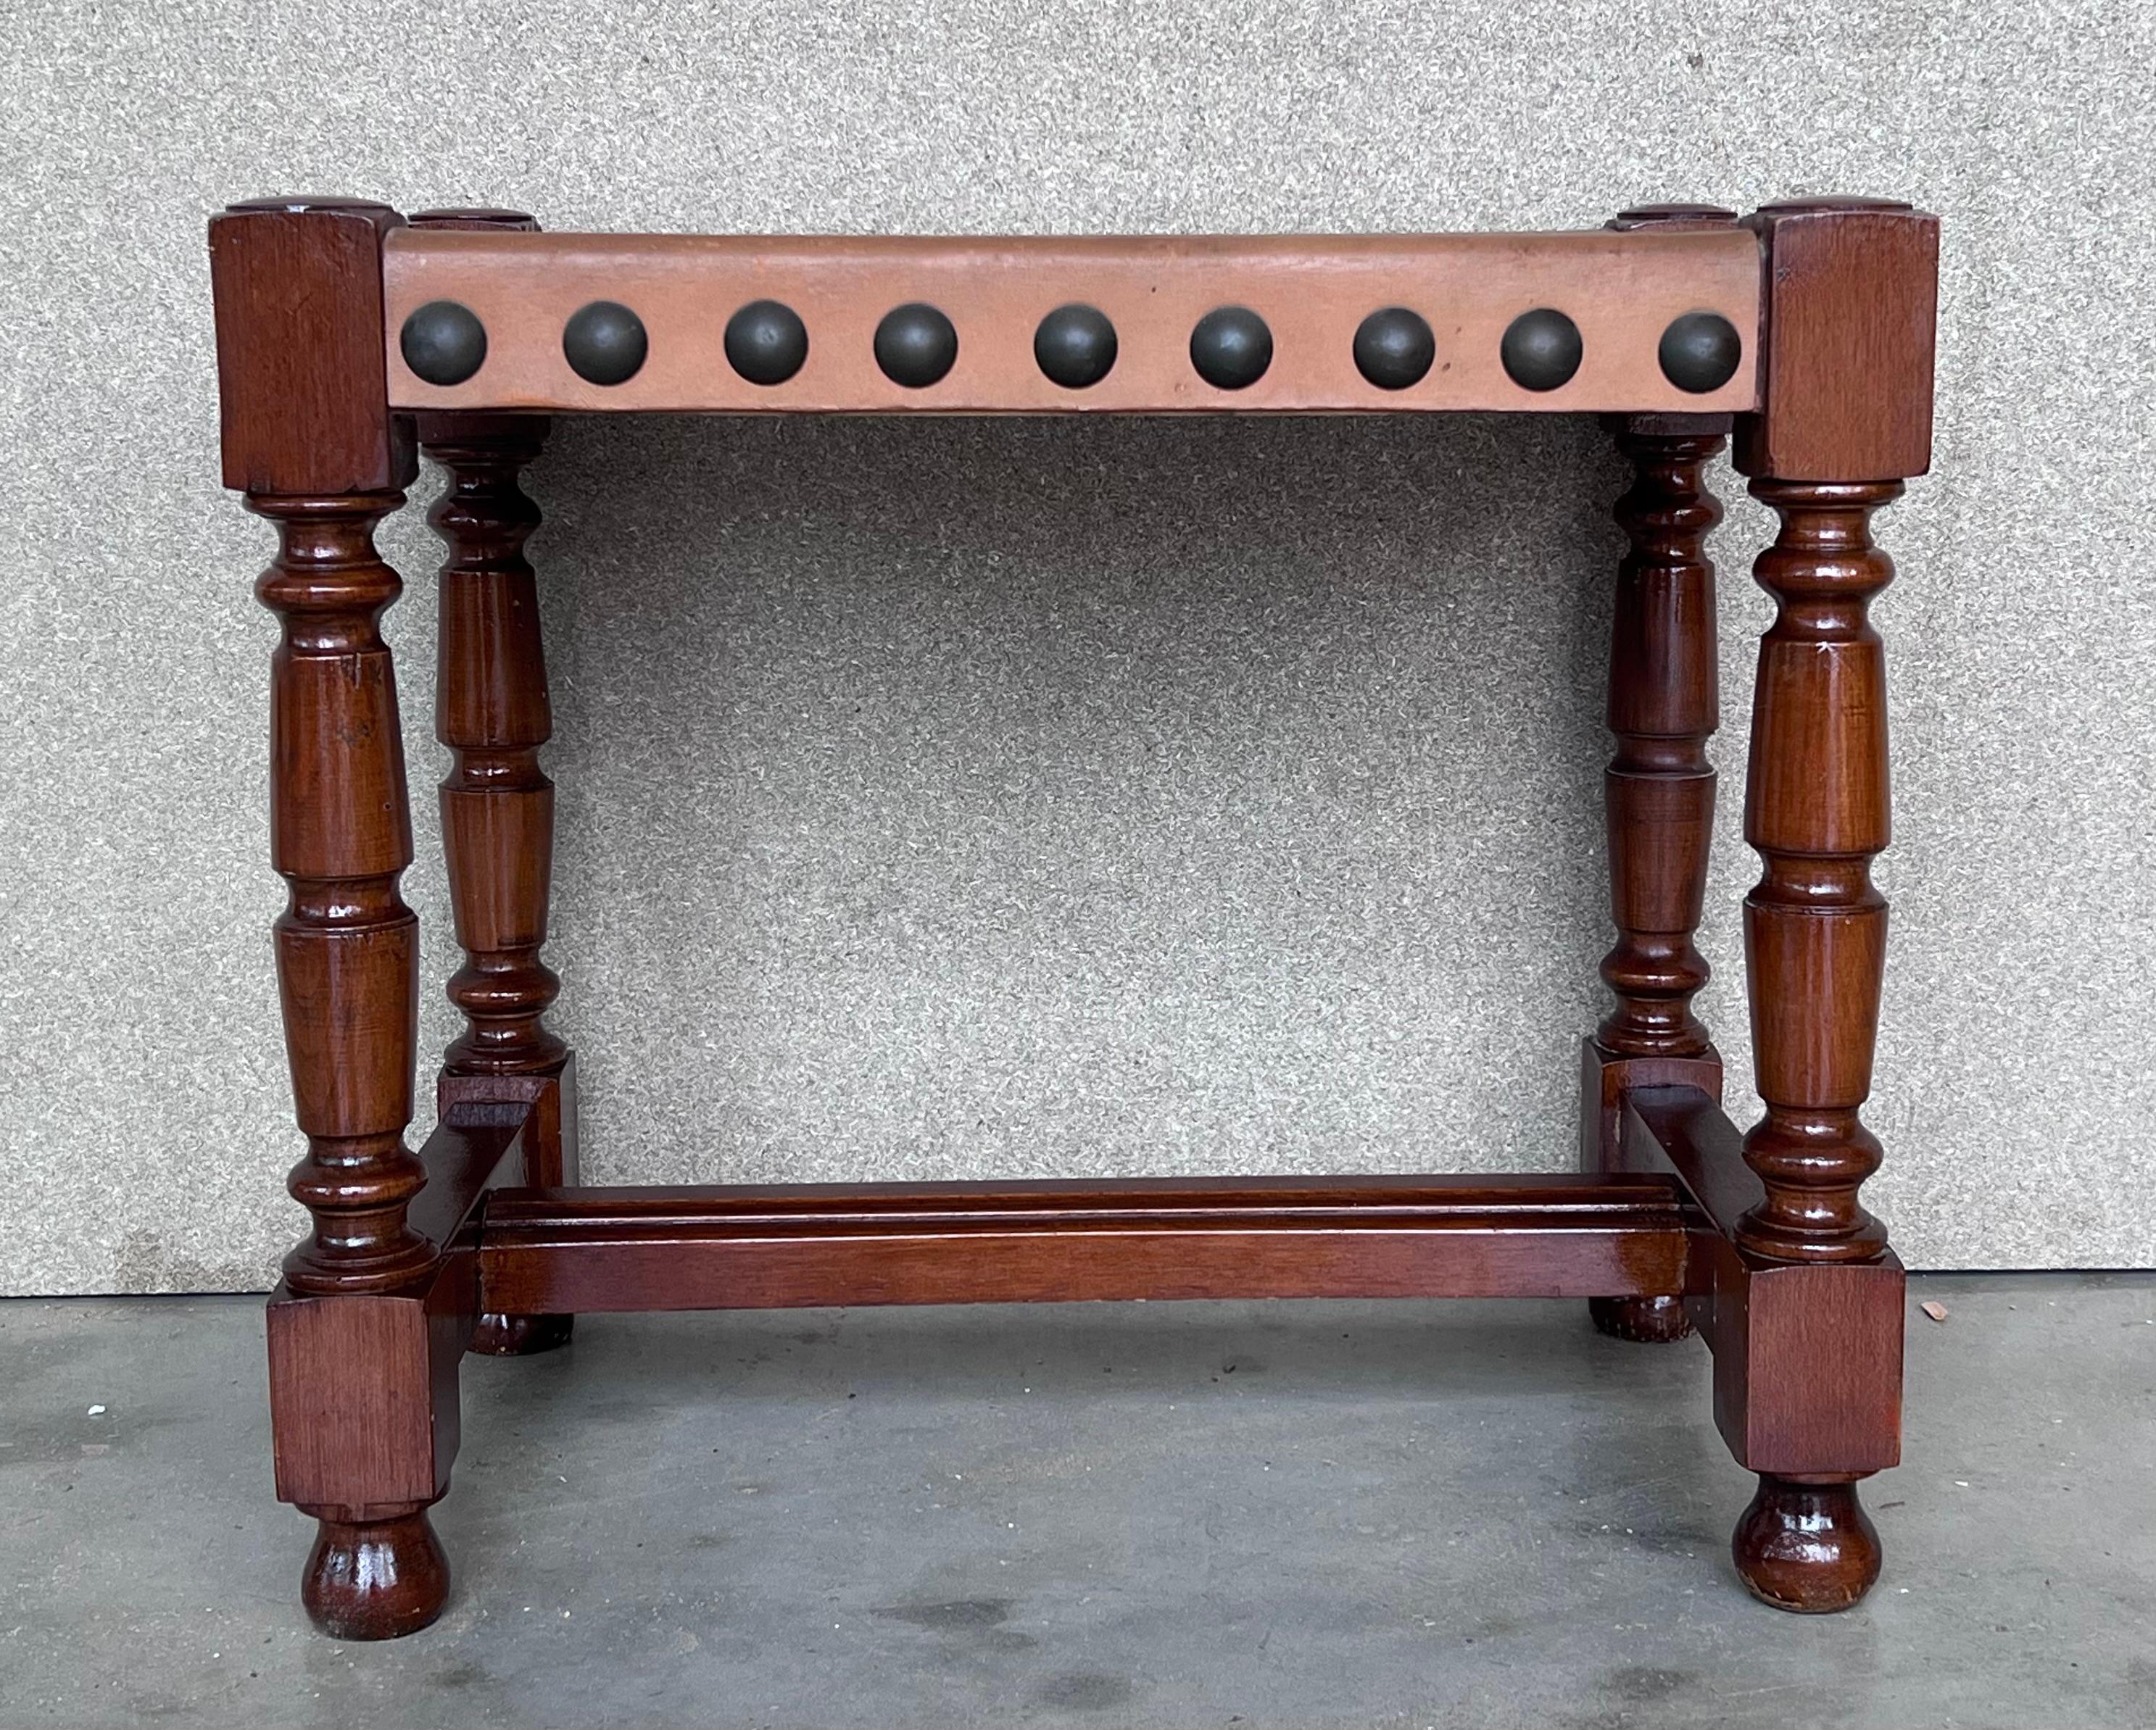 The structure forms a rectangular form with both sides of the base intersecting and supporting each other. The seats are natural cowhide and attached to the frame by large round bronze tacks, 20th century.